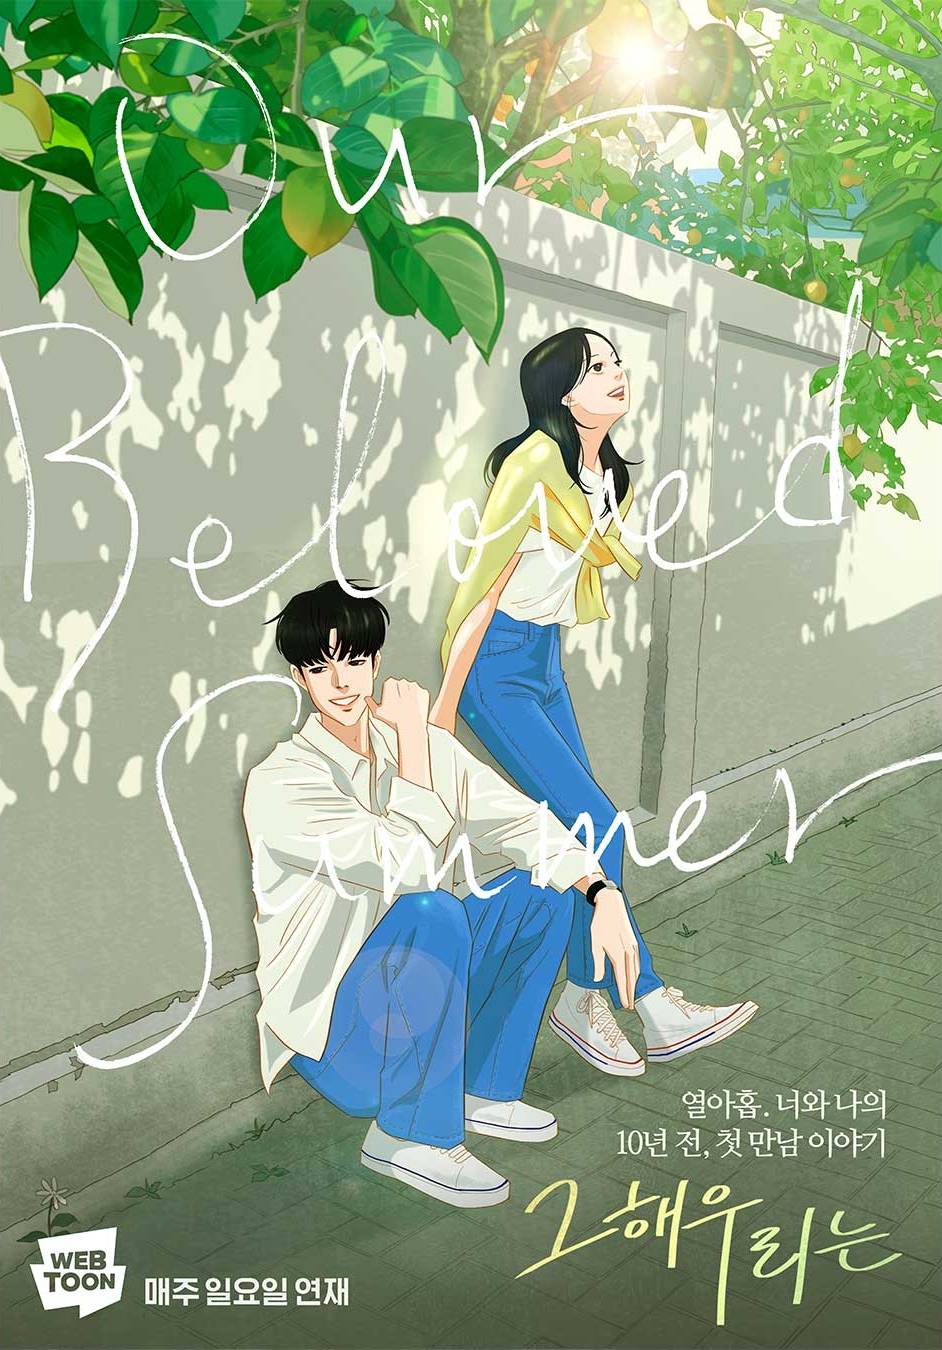 [Photo] Webtoon Poster Added for the Korean Drama 'Our Beloved